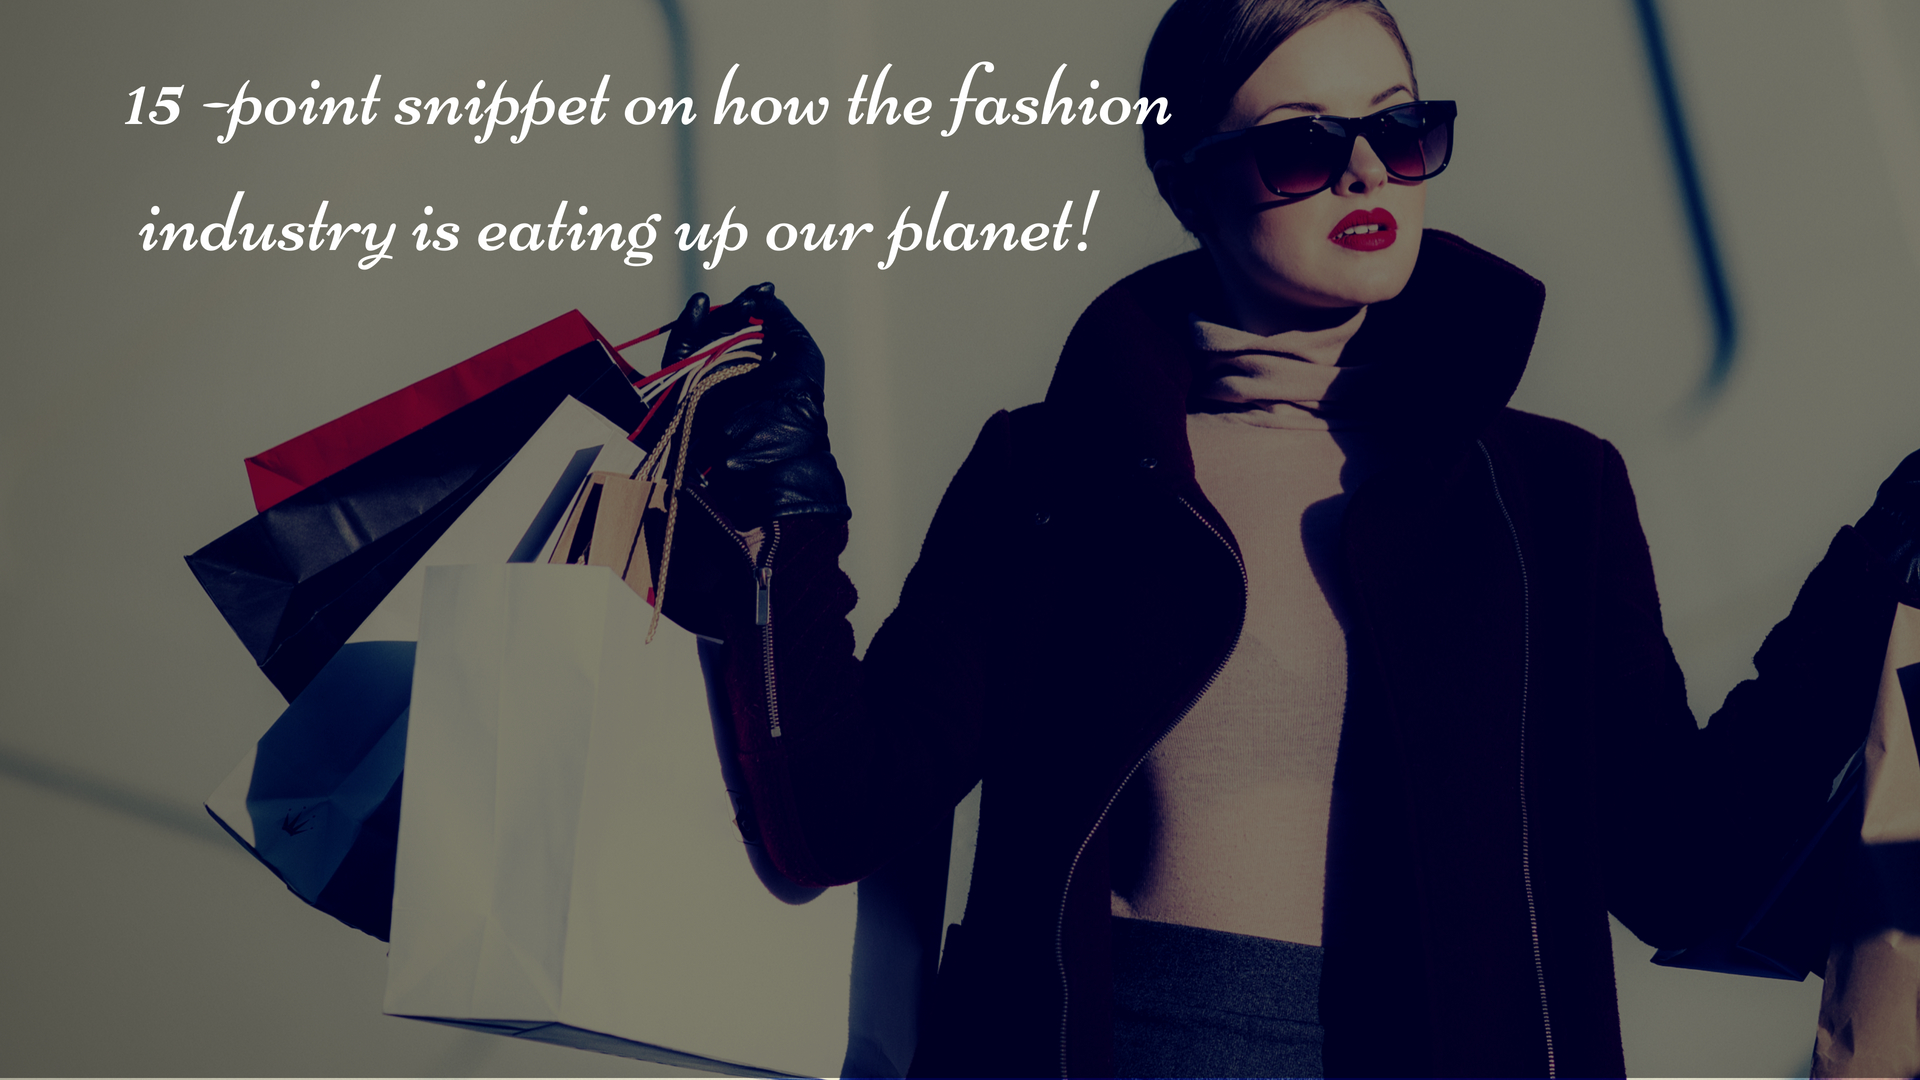 15 Ways the Fashion Industry is Eating Up Our Planet!